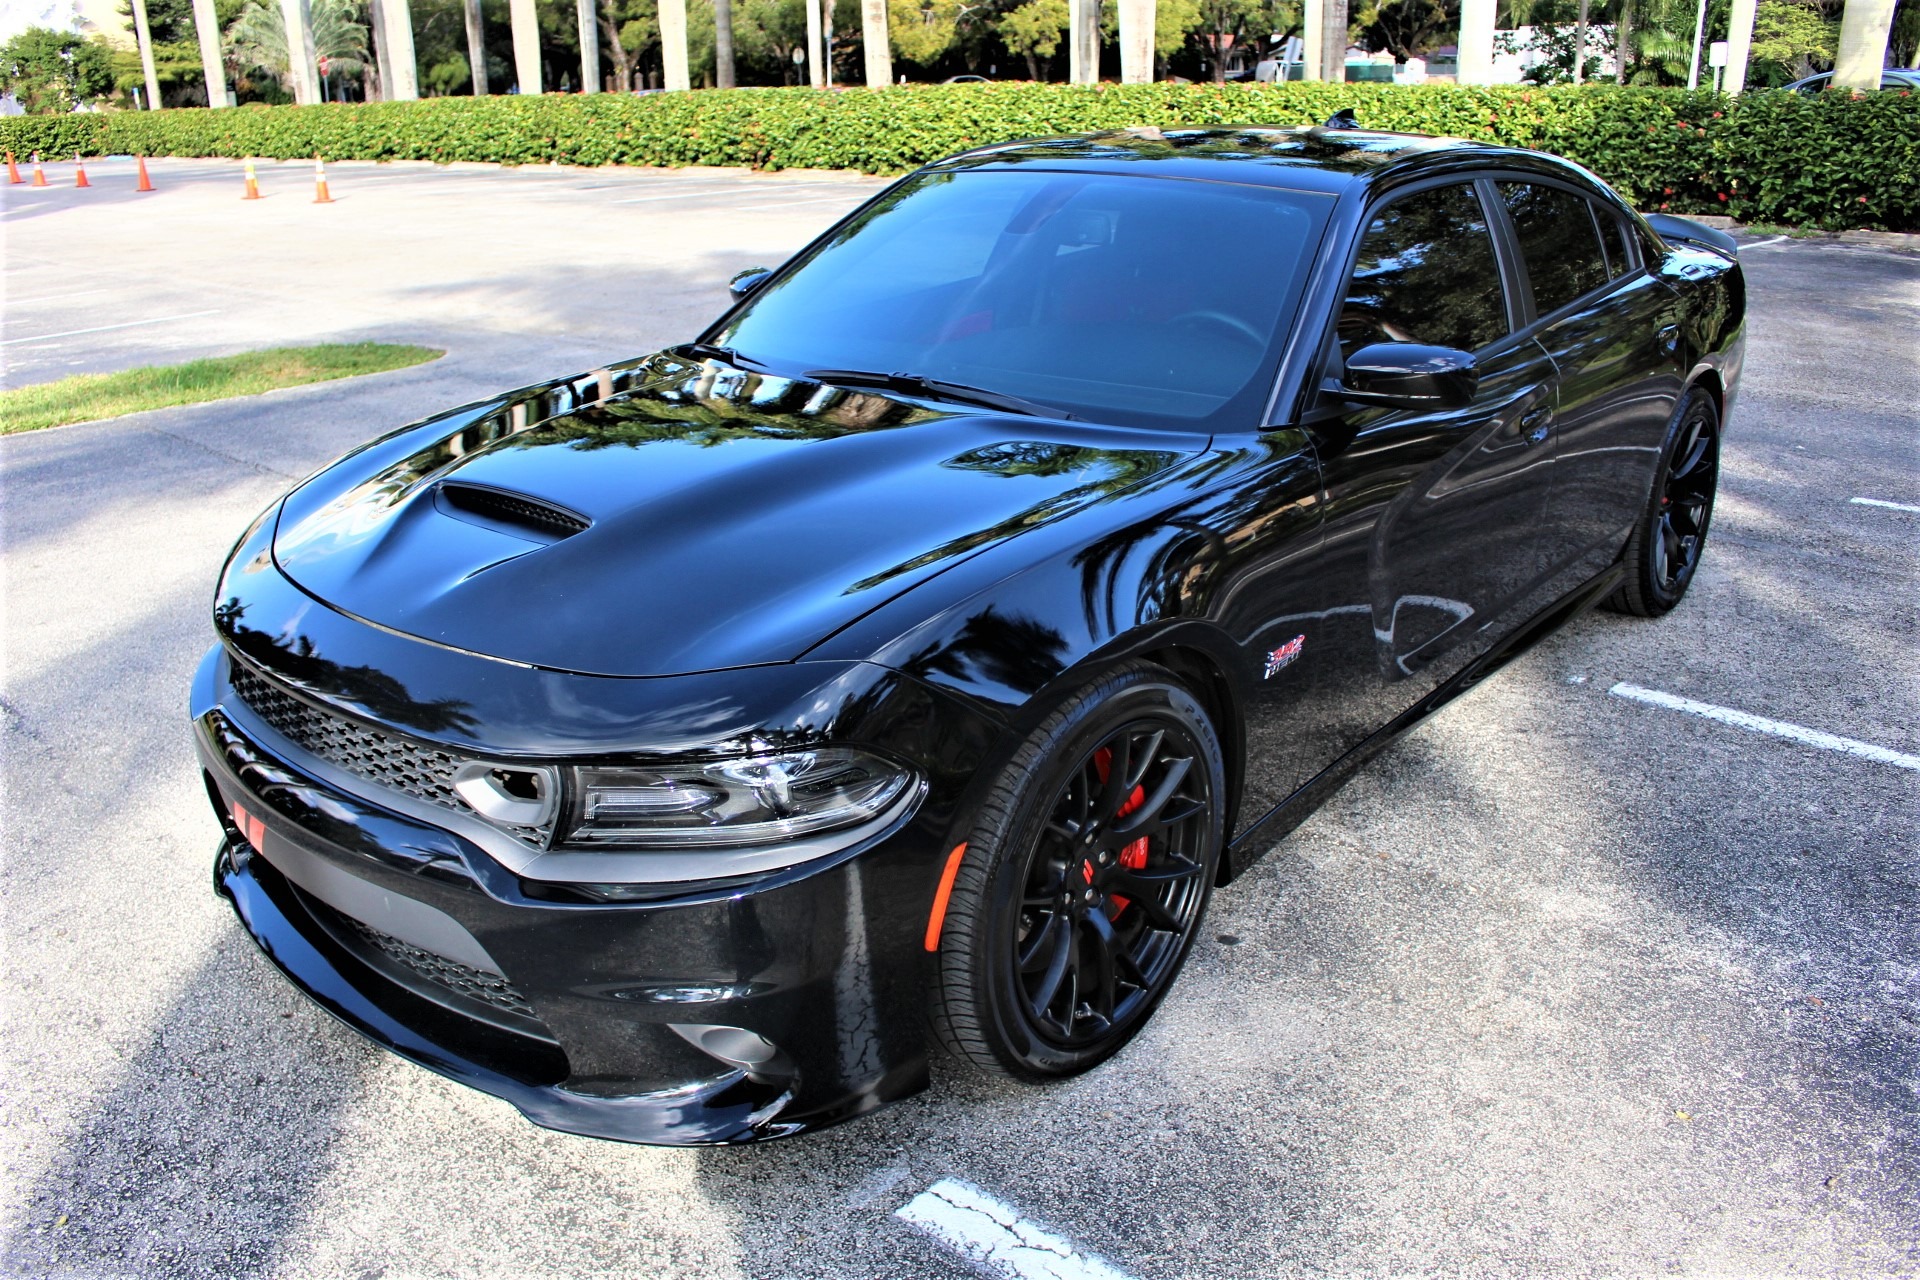 Used 2019 Dodge Charger R/T Scat Pack for sale Sold at The Gables Sports Cars in Miami FL 33146 3